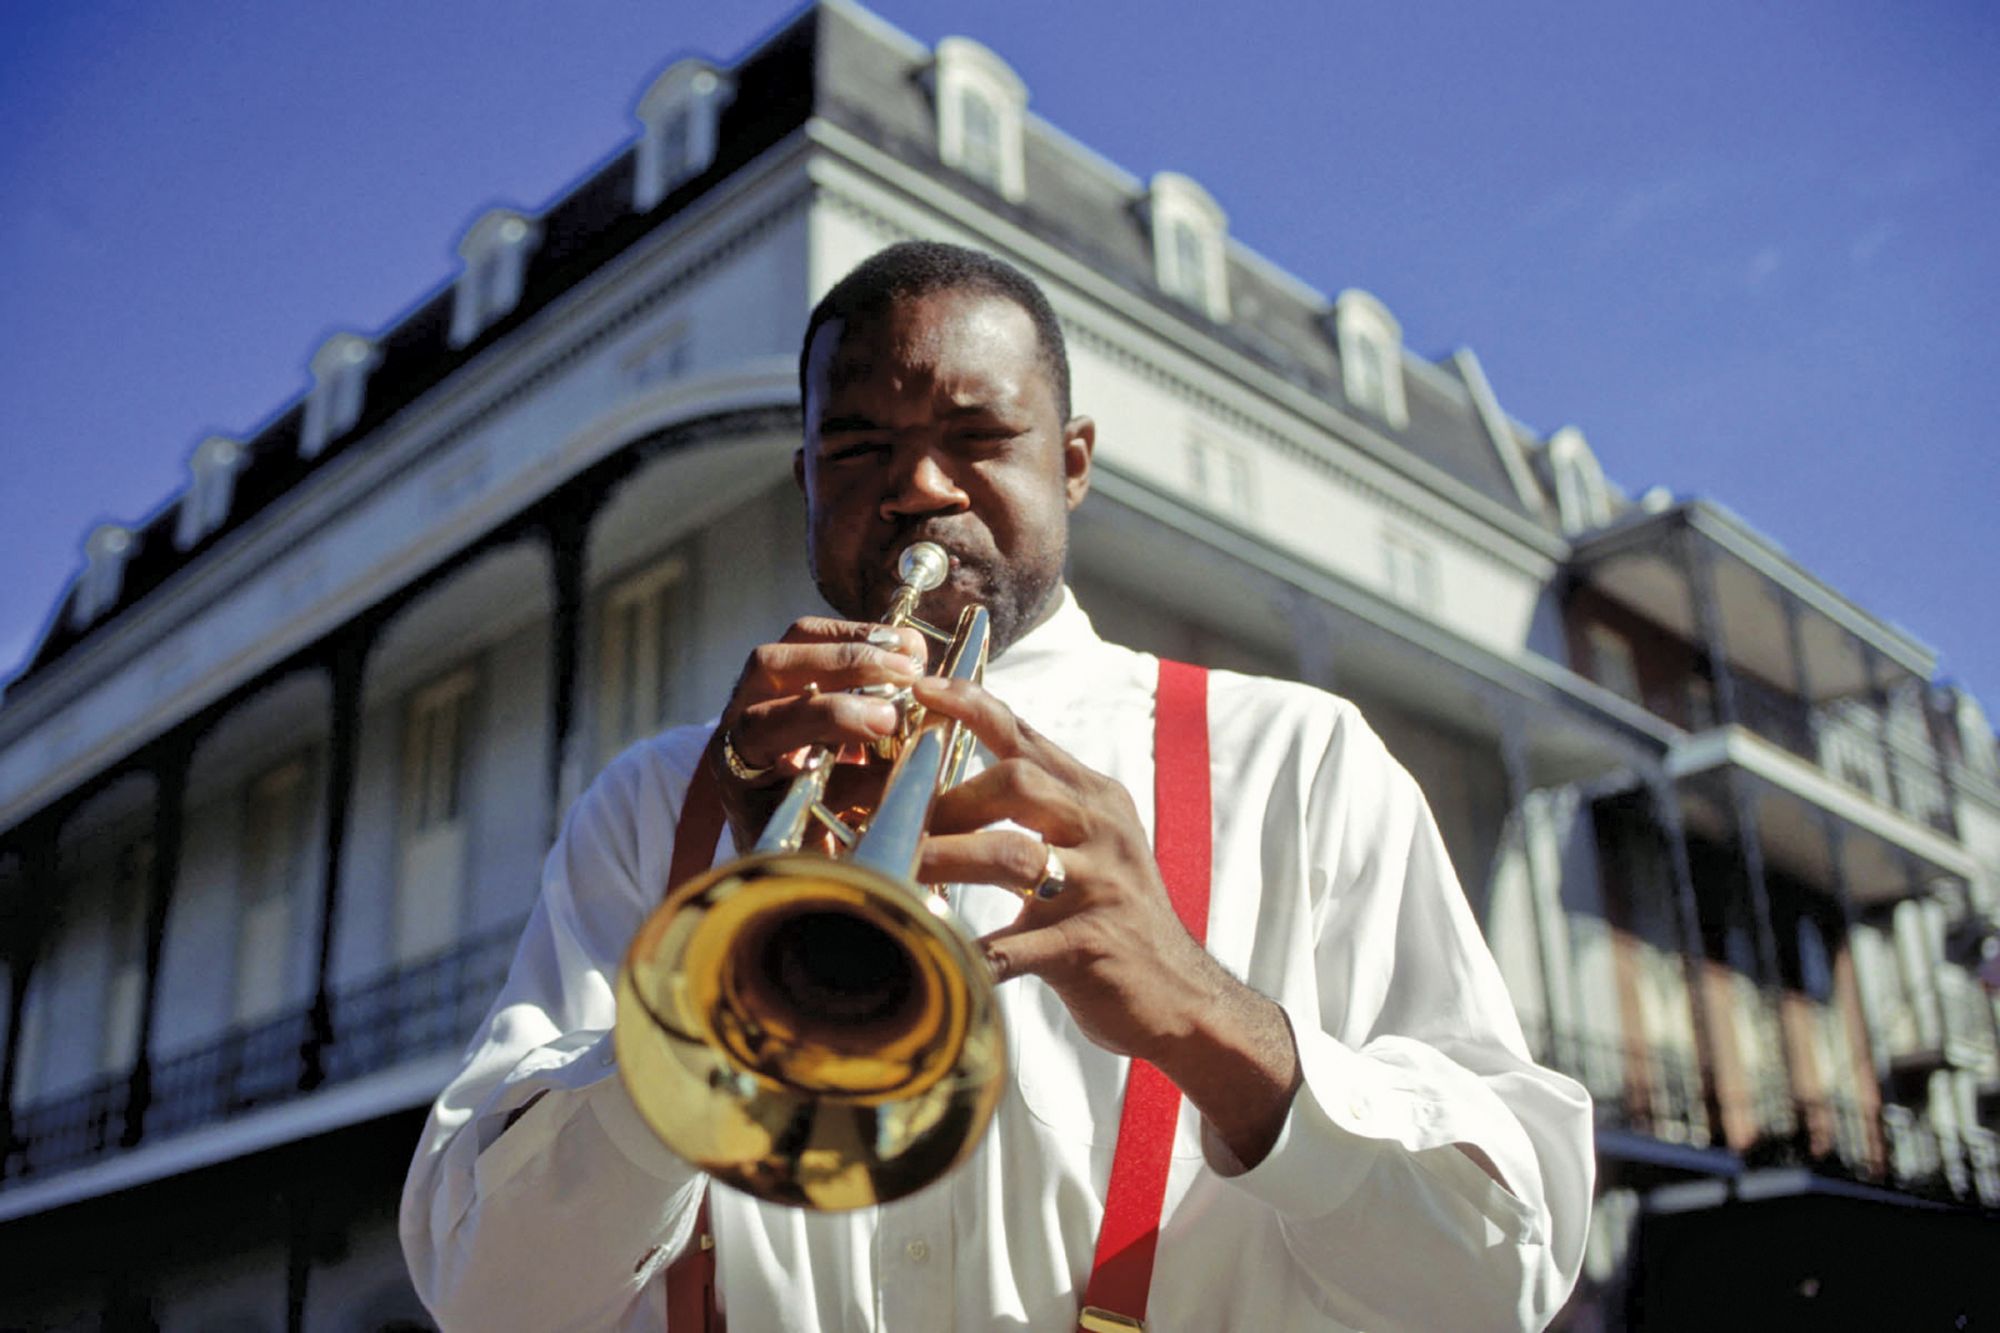 New Orleans musician